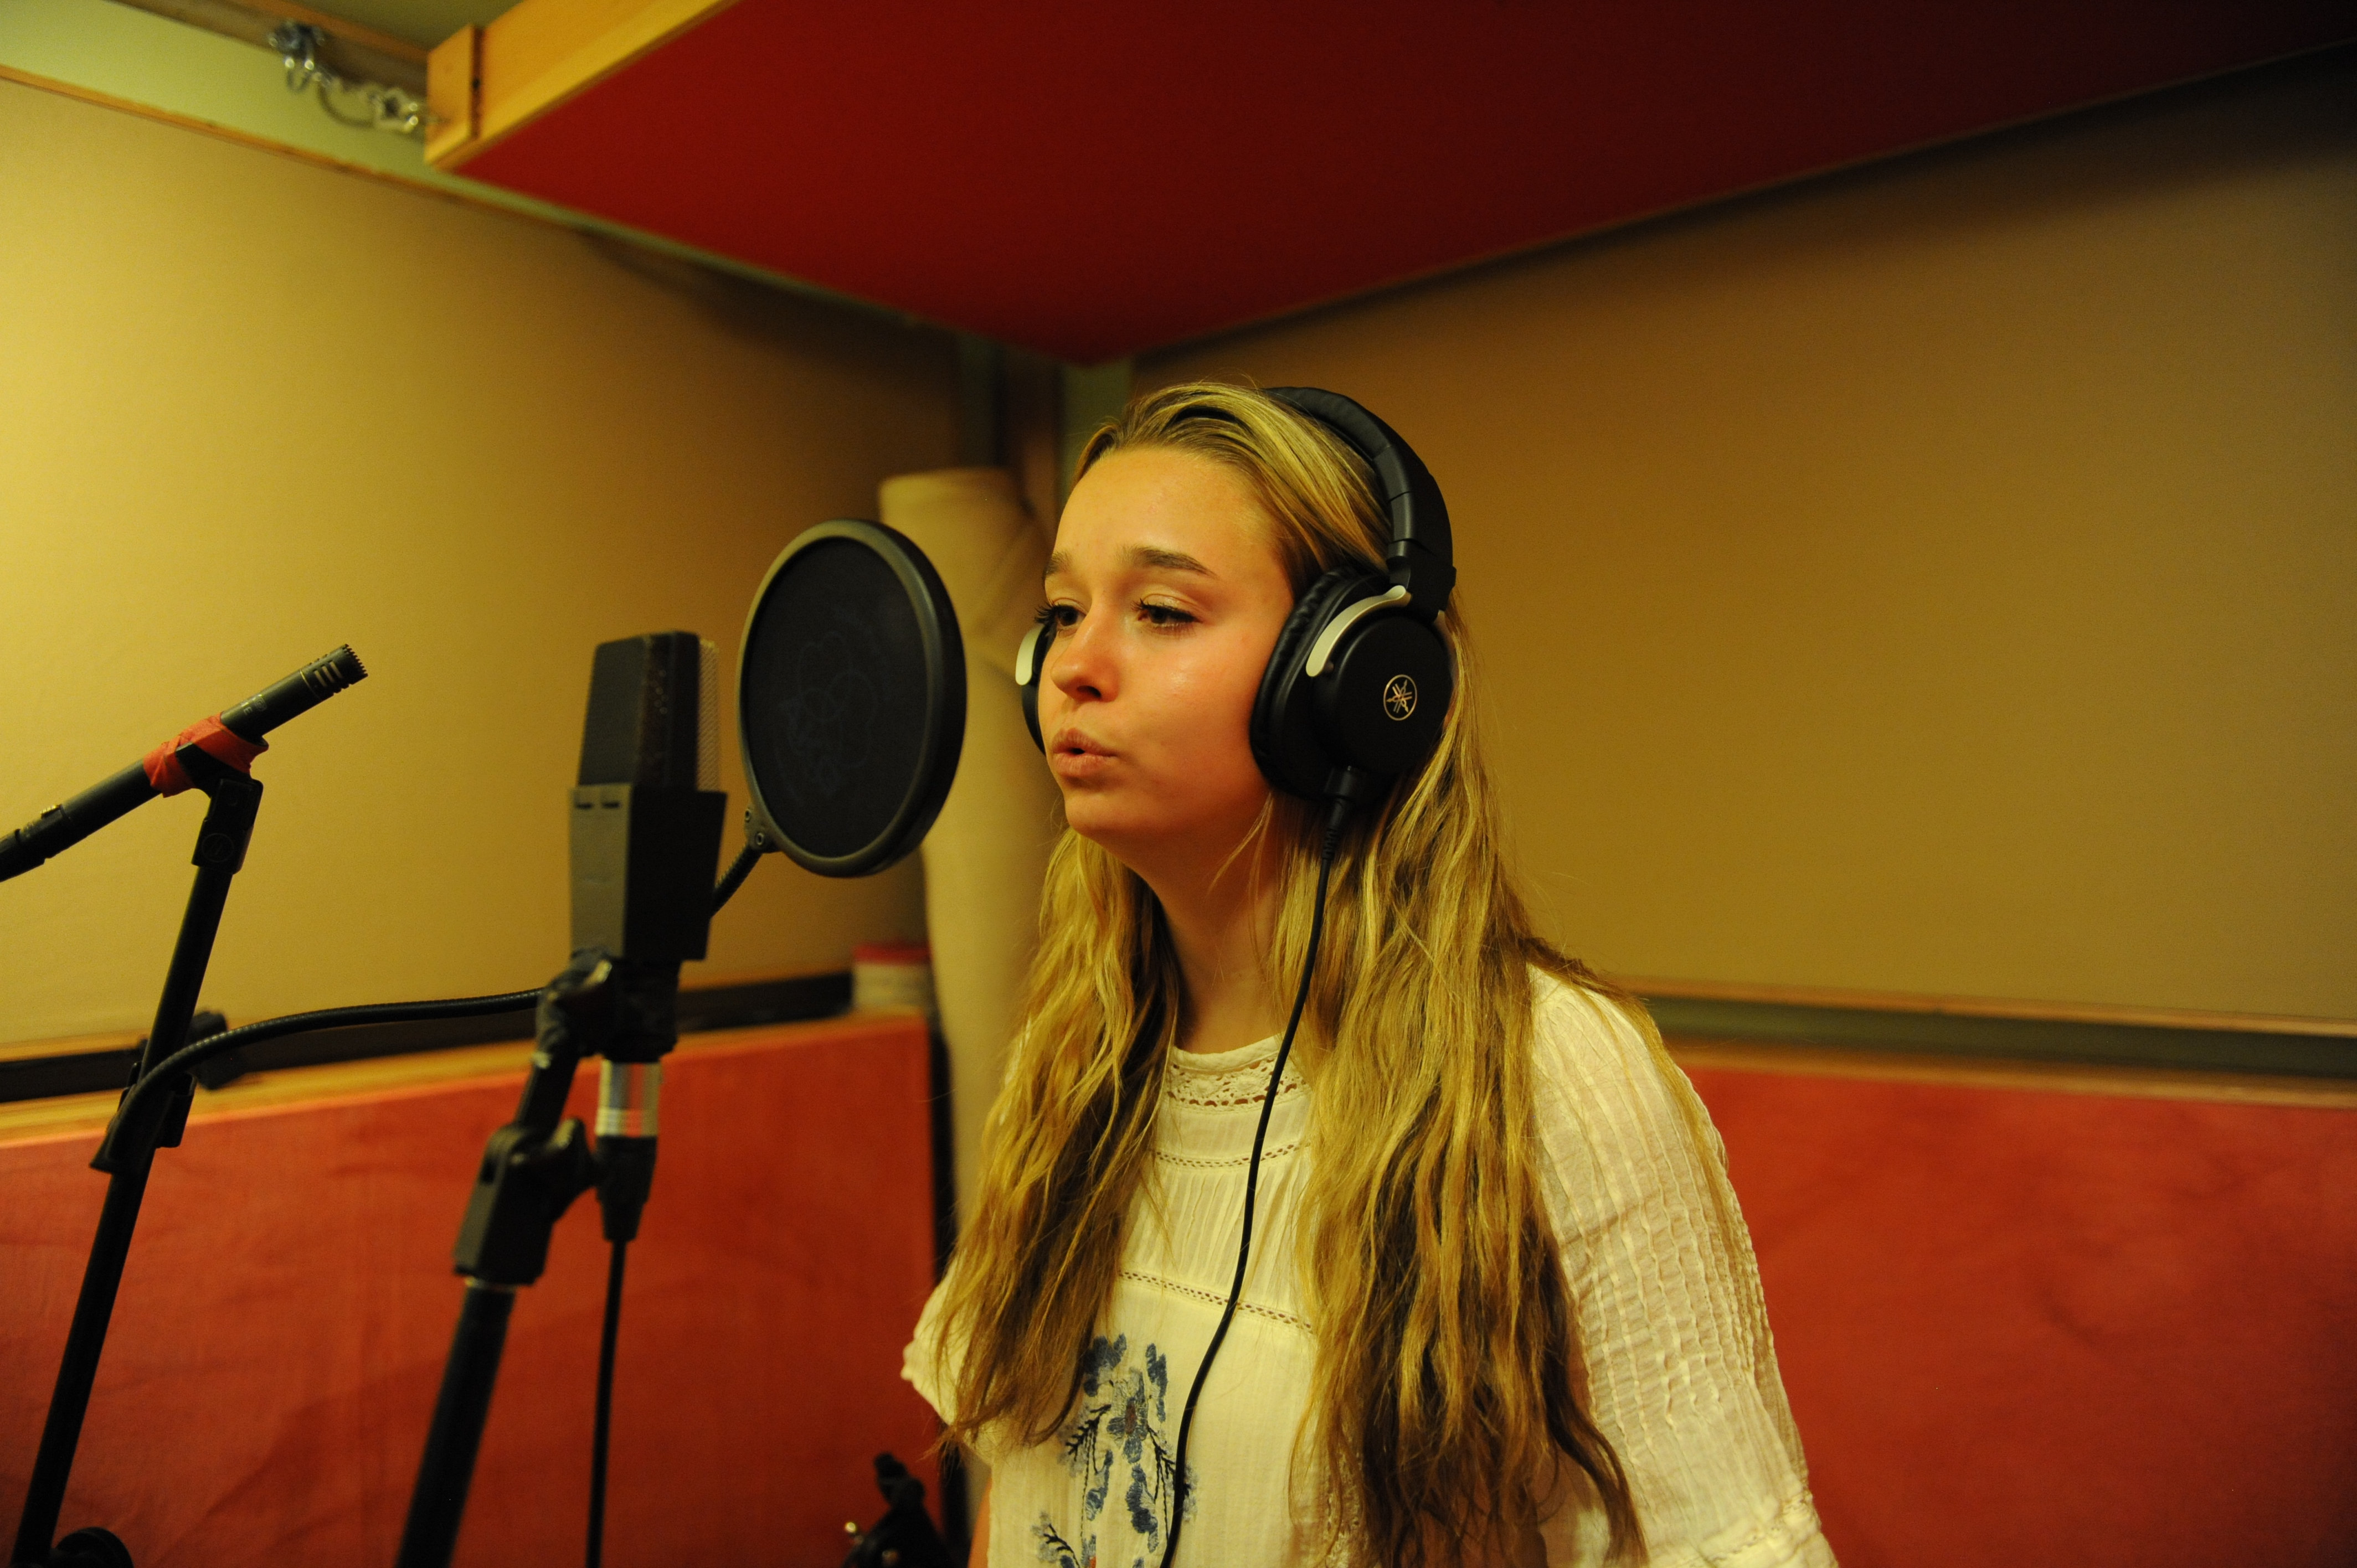 Teen female singing and recording.